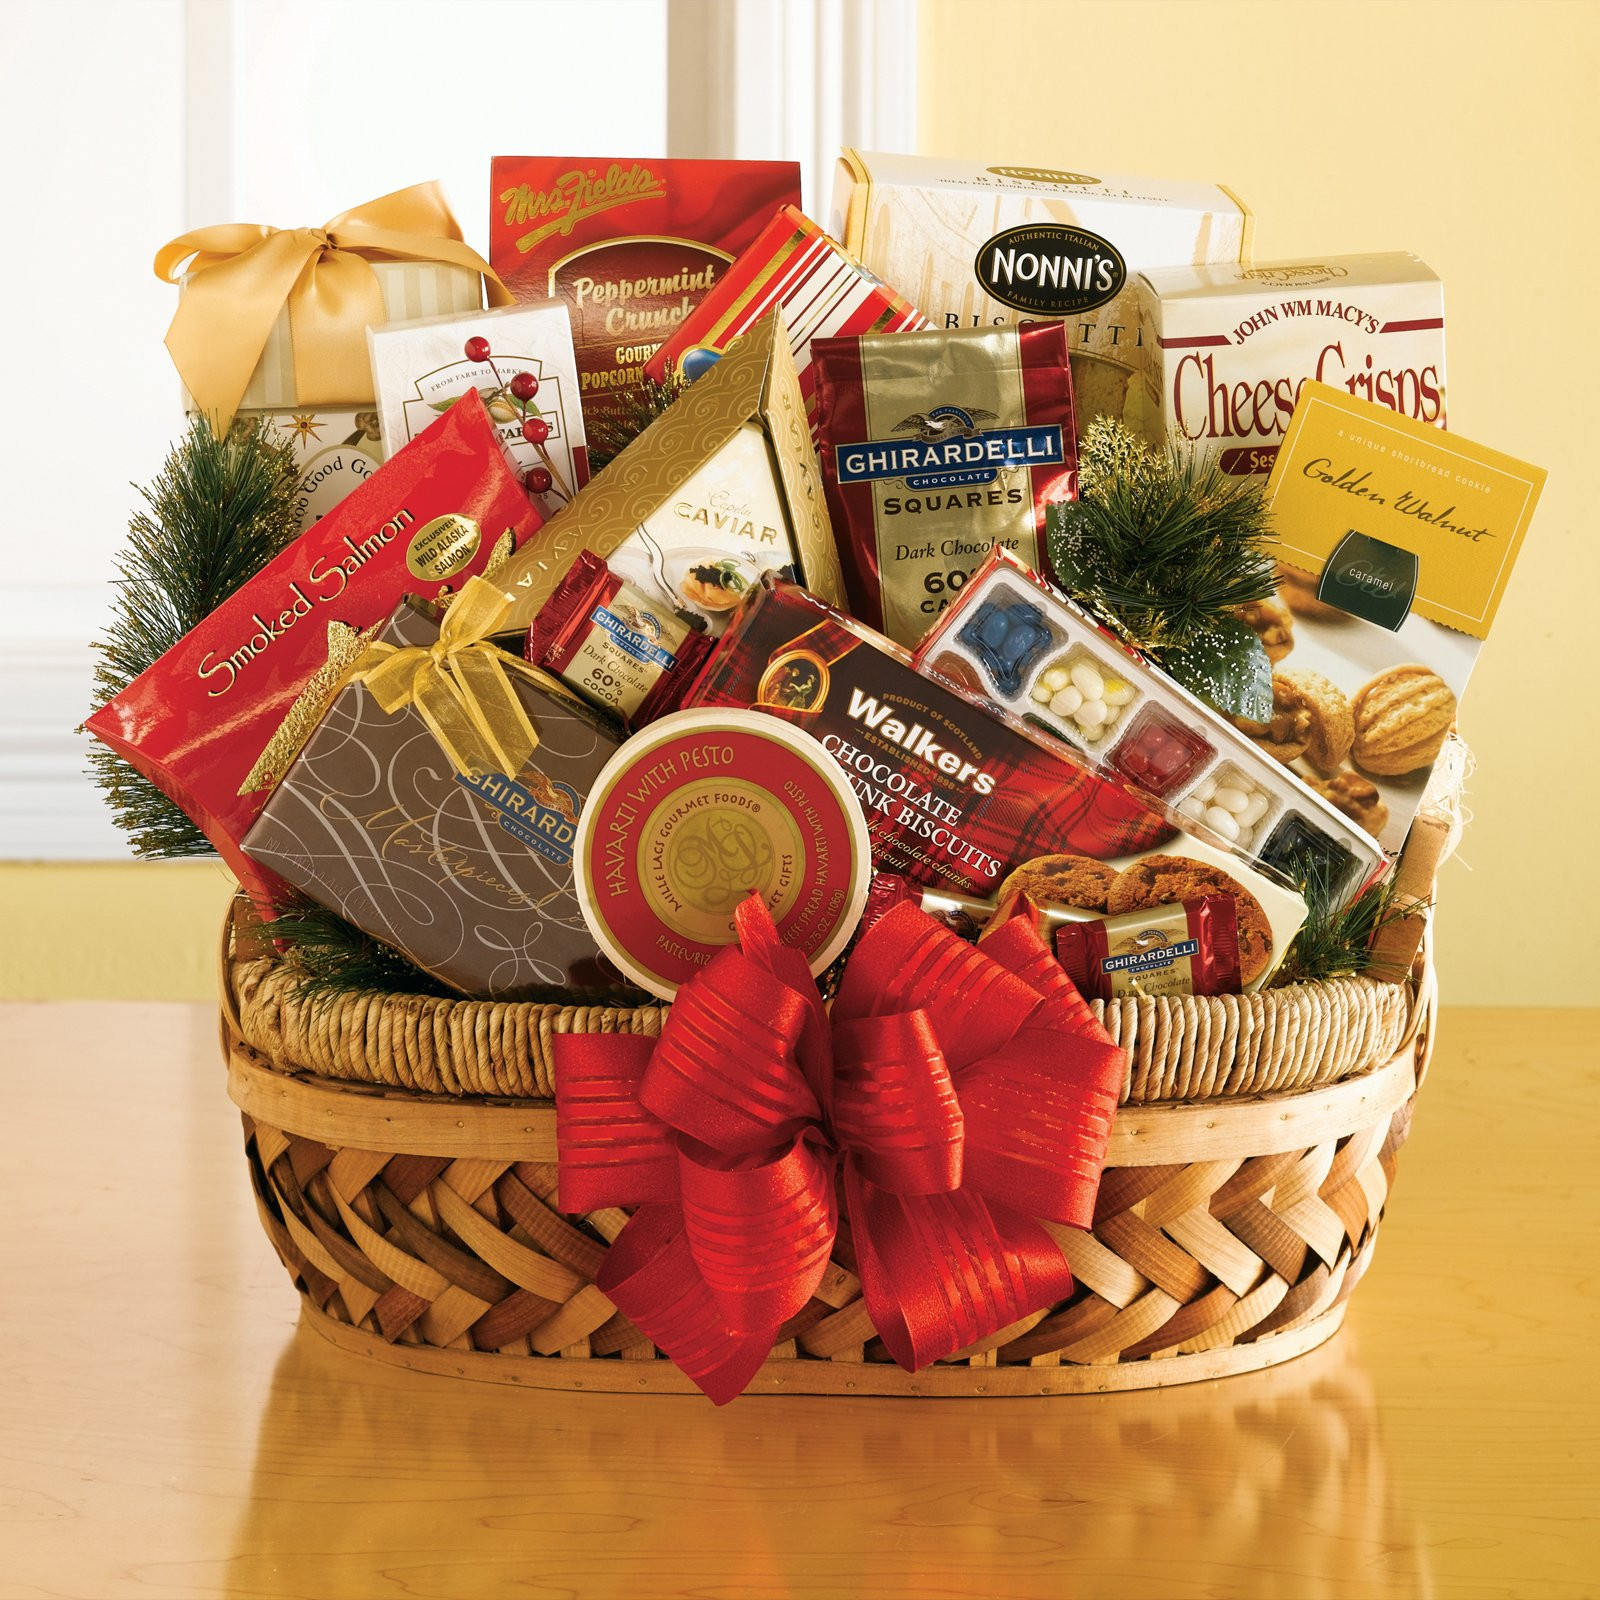 Birthday Gift Basket
 Gift Baskets to show you care